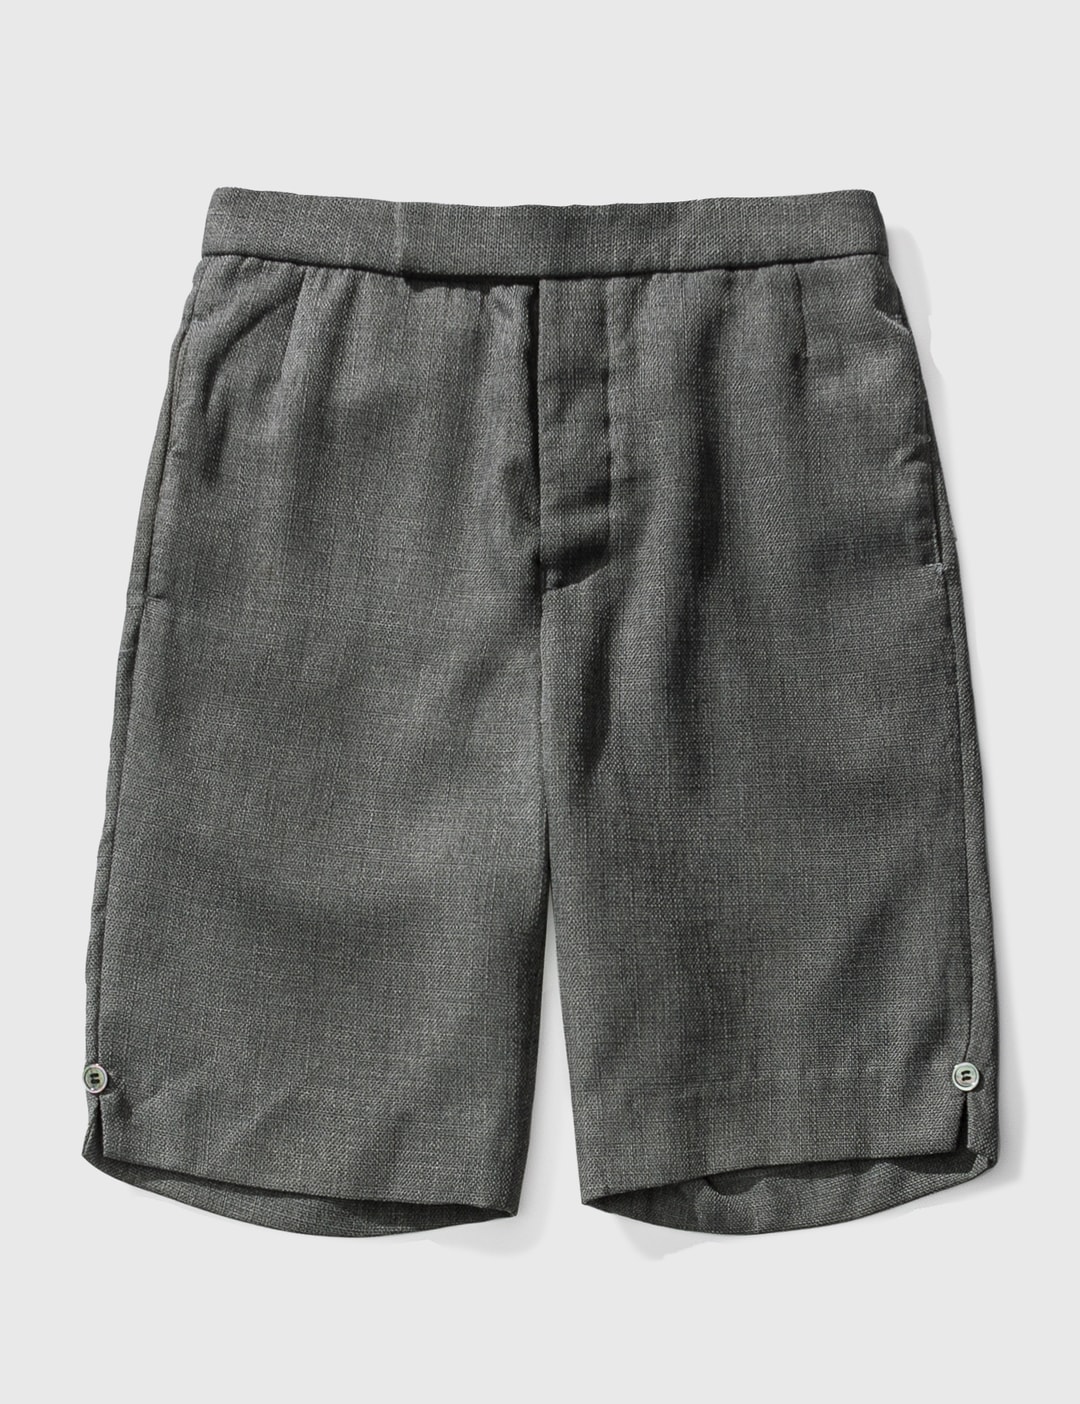 Thom Browne Wool Shorts Placeholder Image